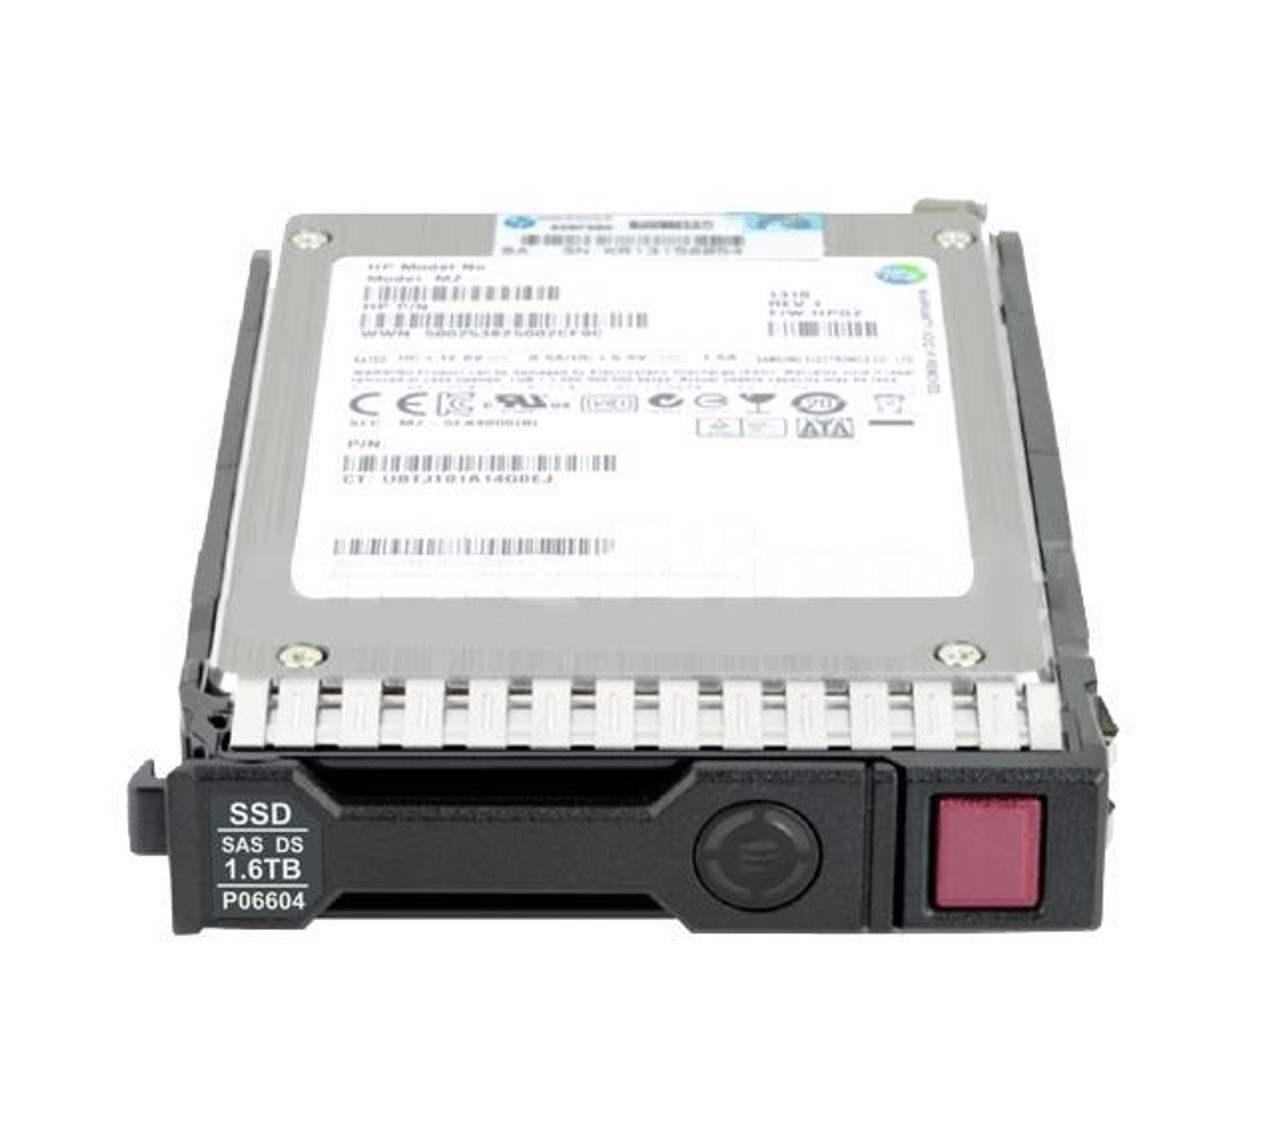 P04545-H21#0D1 HPE 1.6TB SAS 12Gbps 2.5-inch Internal Solid State Drive (SSD) with Smart Carrier